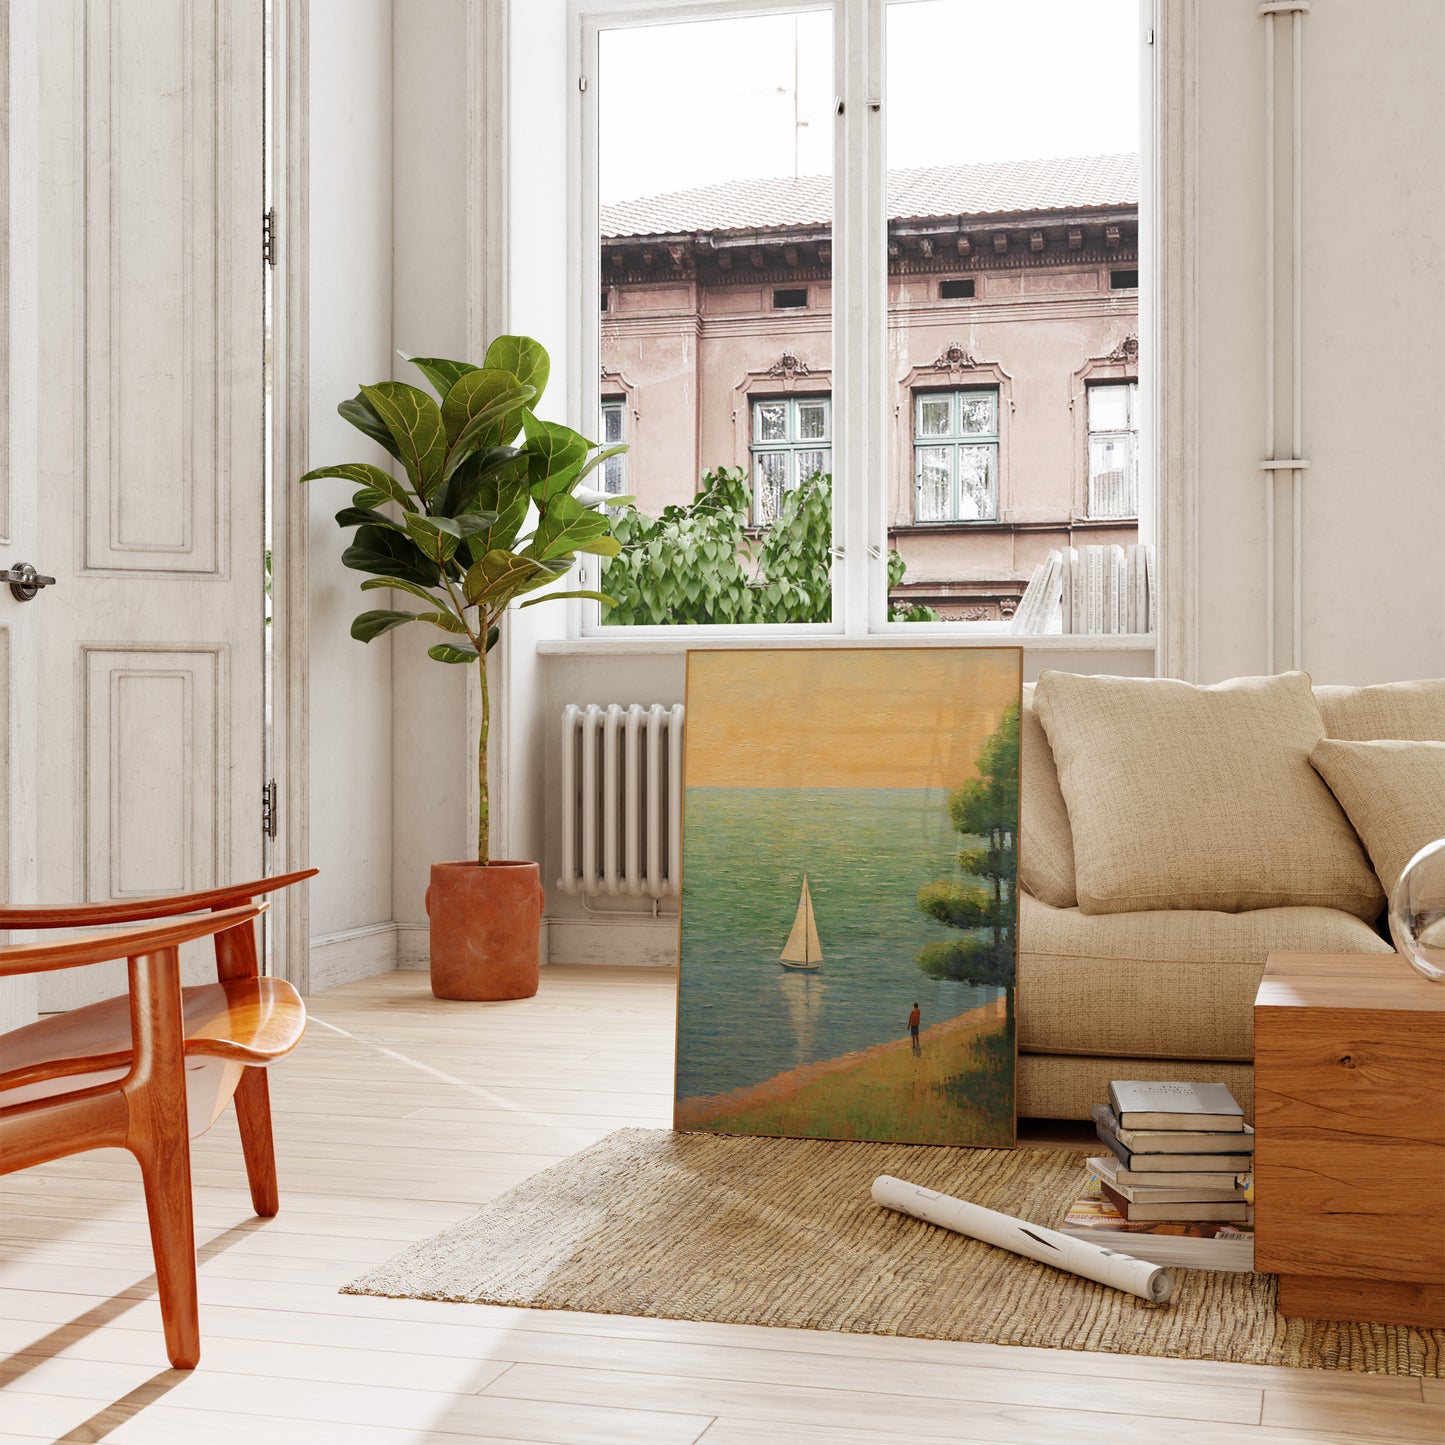 A cozy living room with an open door, a plant, artwork, and modern furniture.